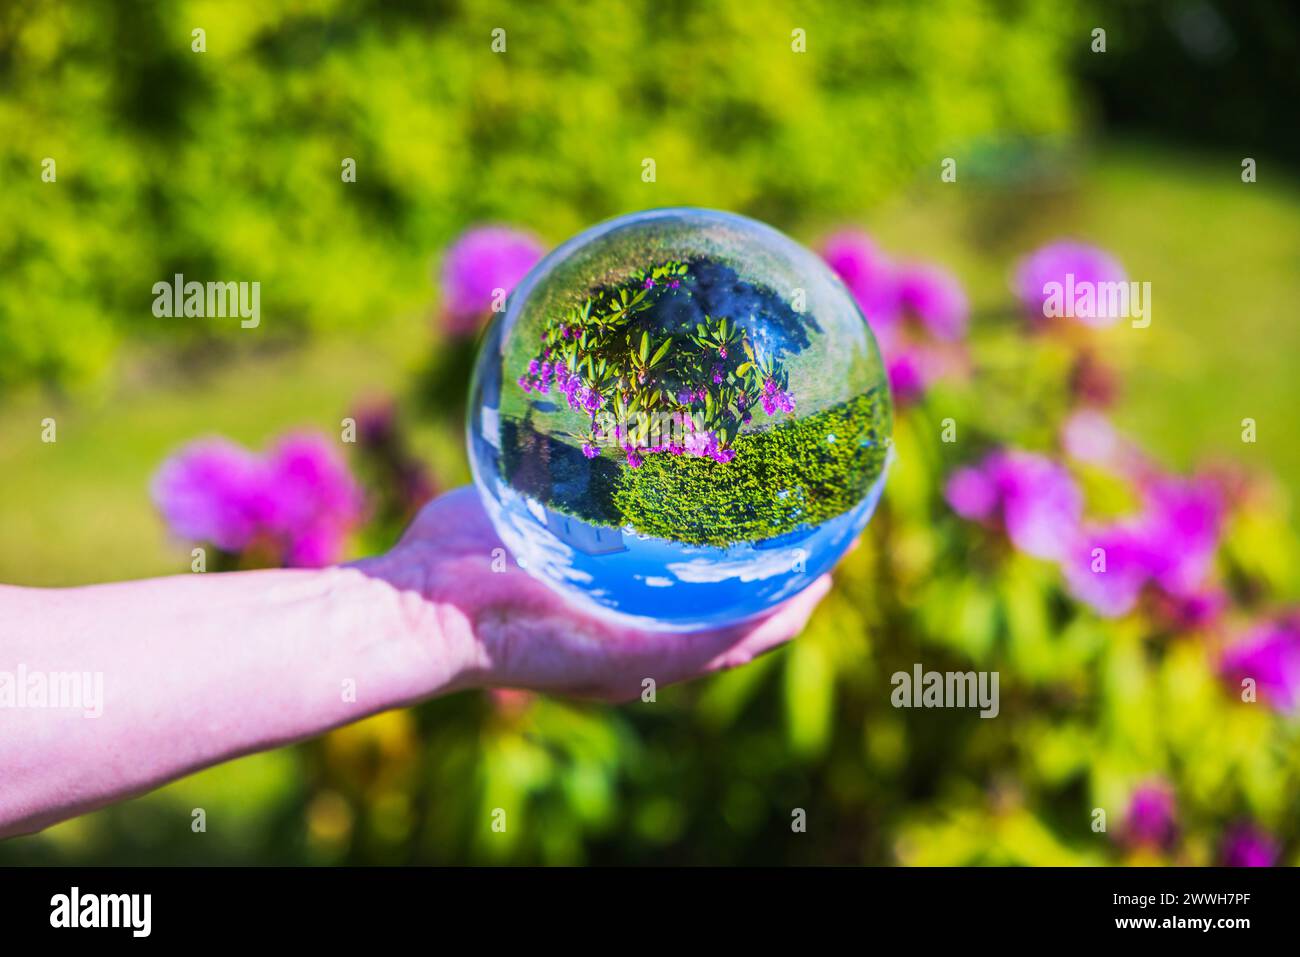 Close-up of hand holding crystal ball reflecting reversed image of blooming rhododendron bush on green lawn in garden. Stock Photo